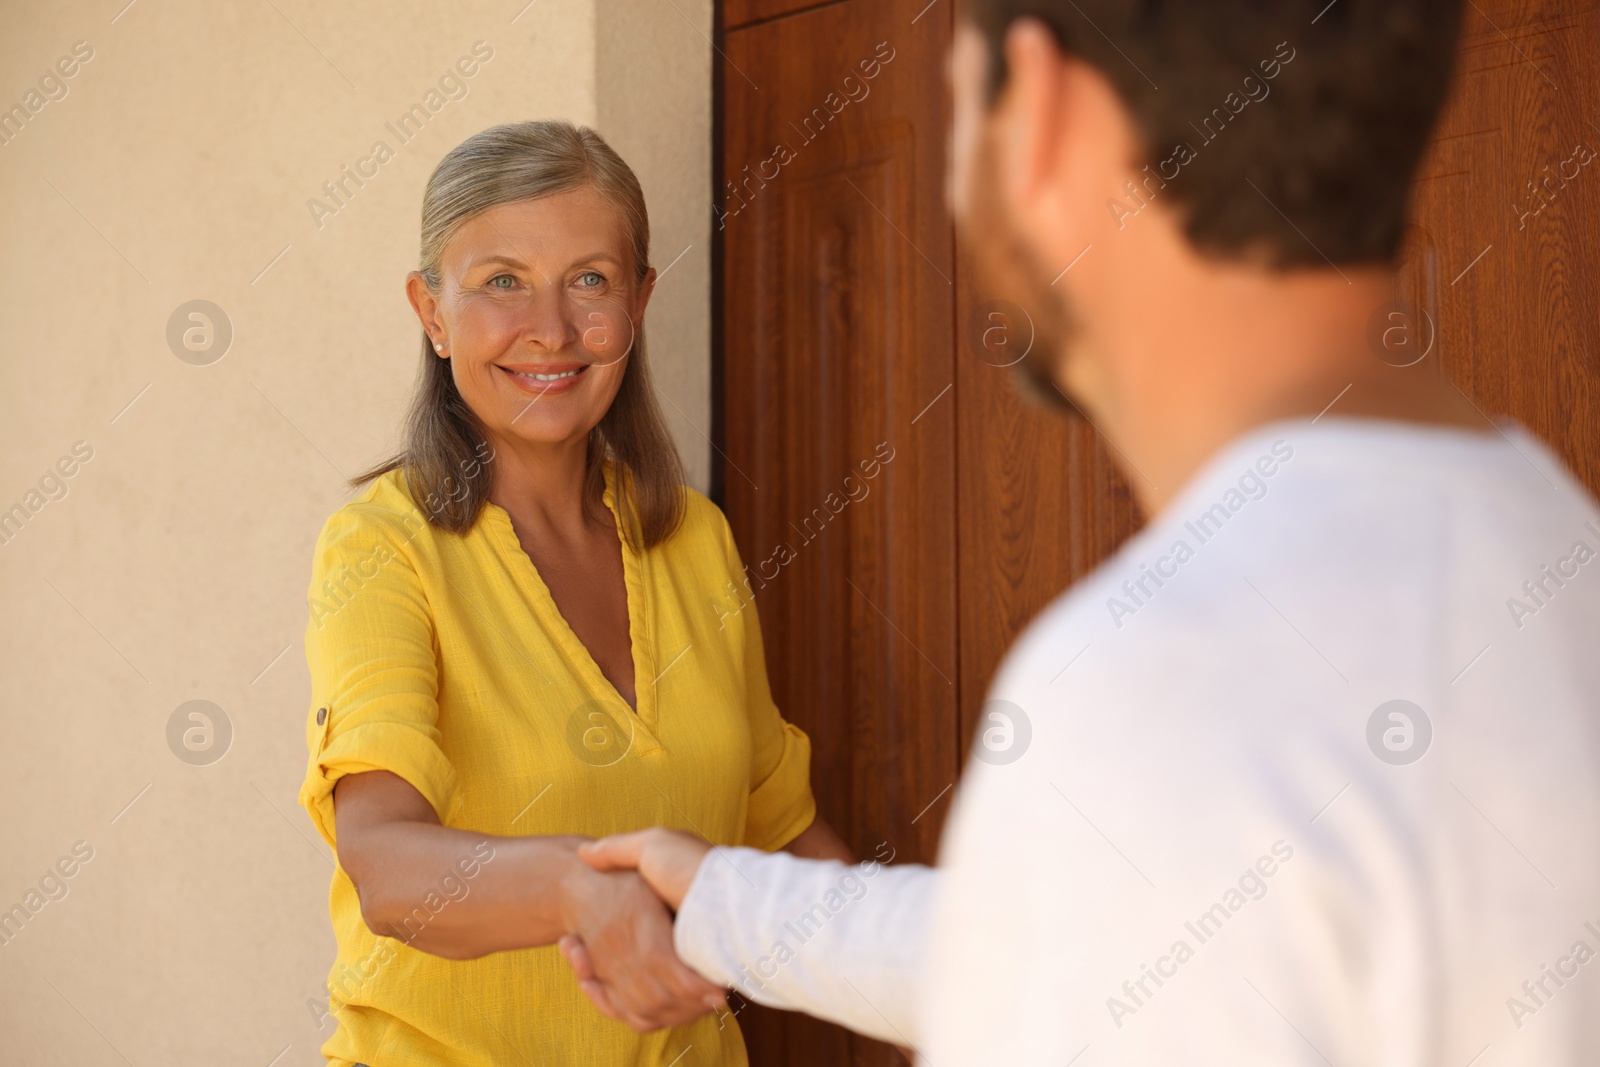 Photo of Friendly relationship with neighbours. Happy senior woman and man shaking hands near house outdoors